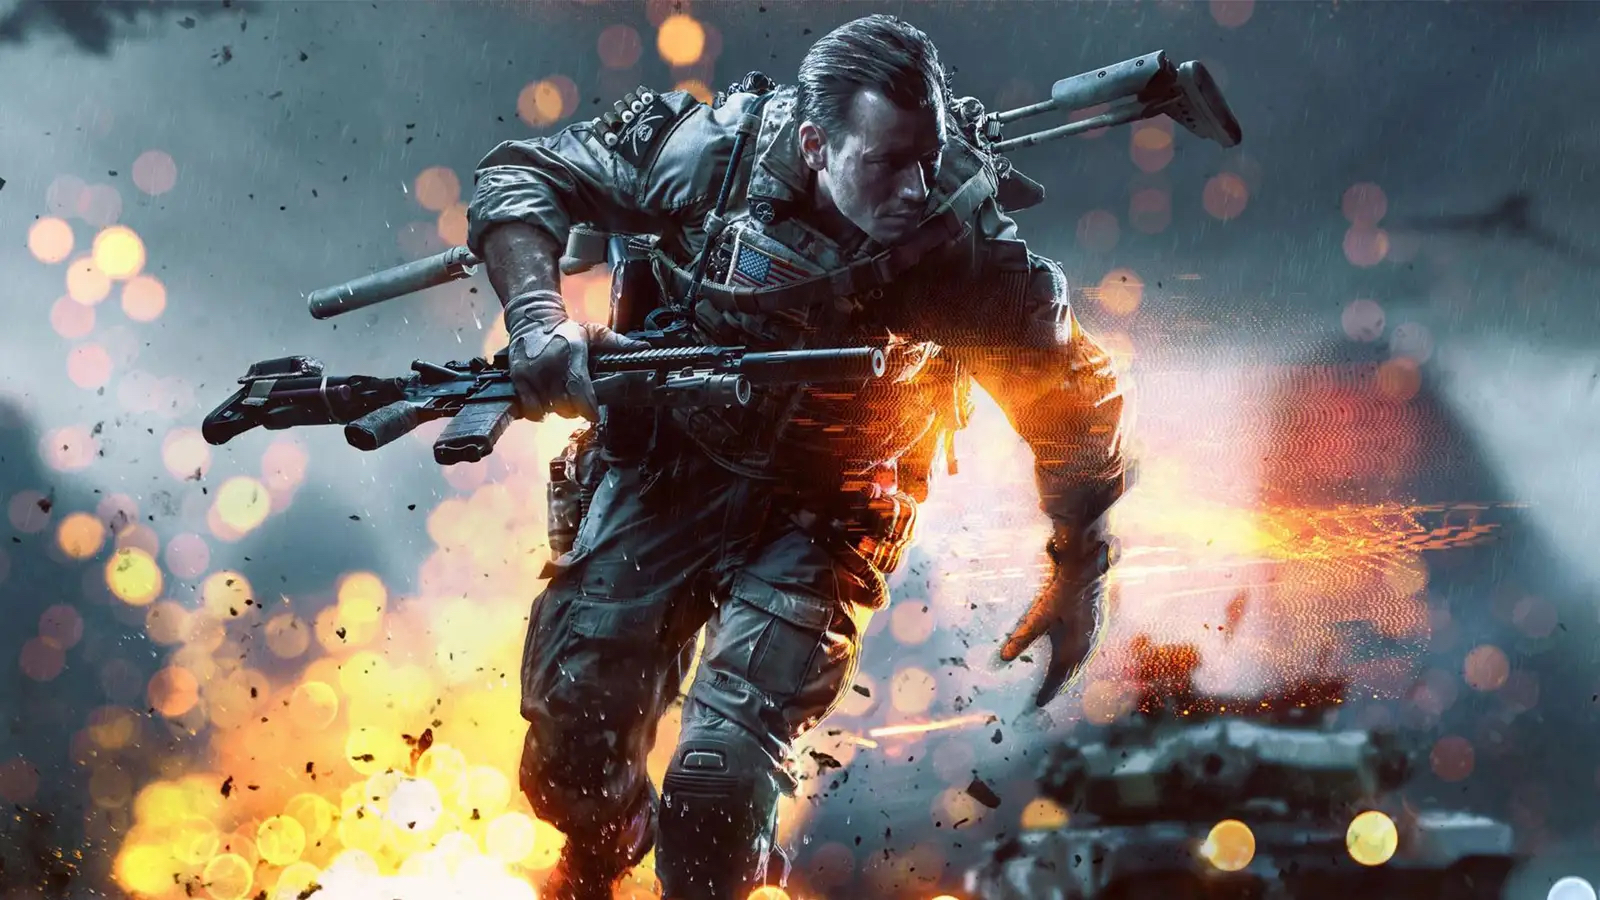 shooting-in-Battlefield-2042 Preparing for Battlefield 2042? Here are 5 HUGE Tips for BF4